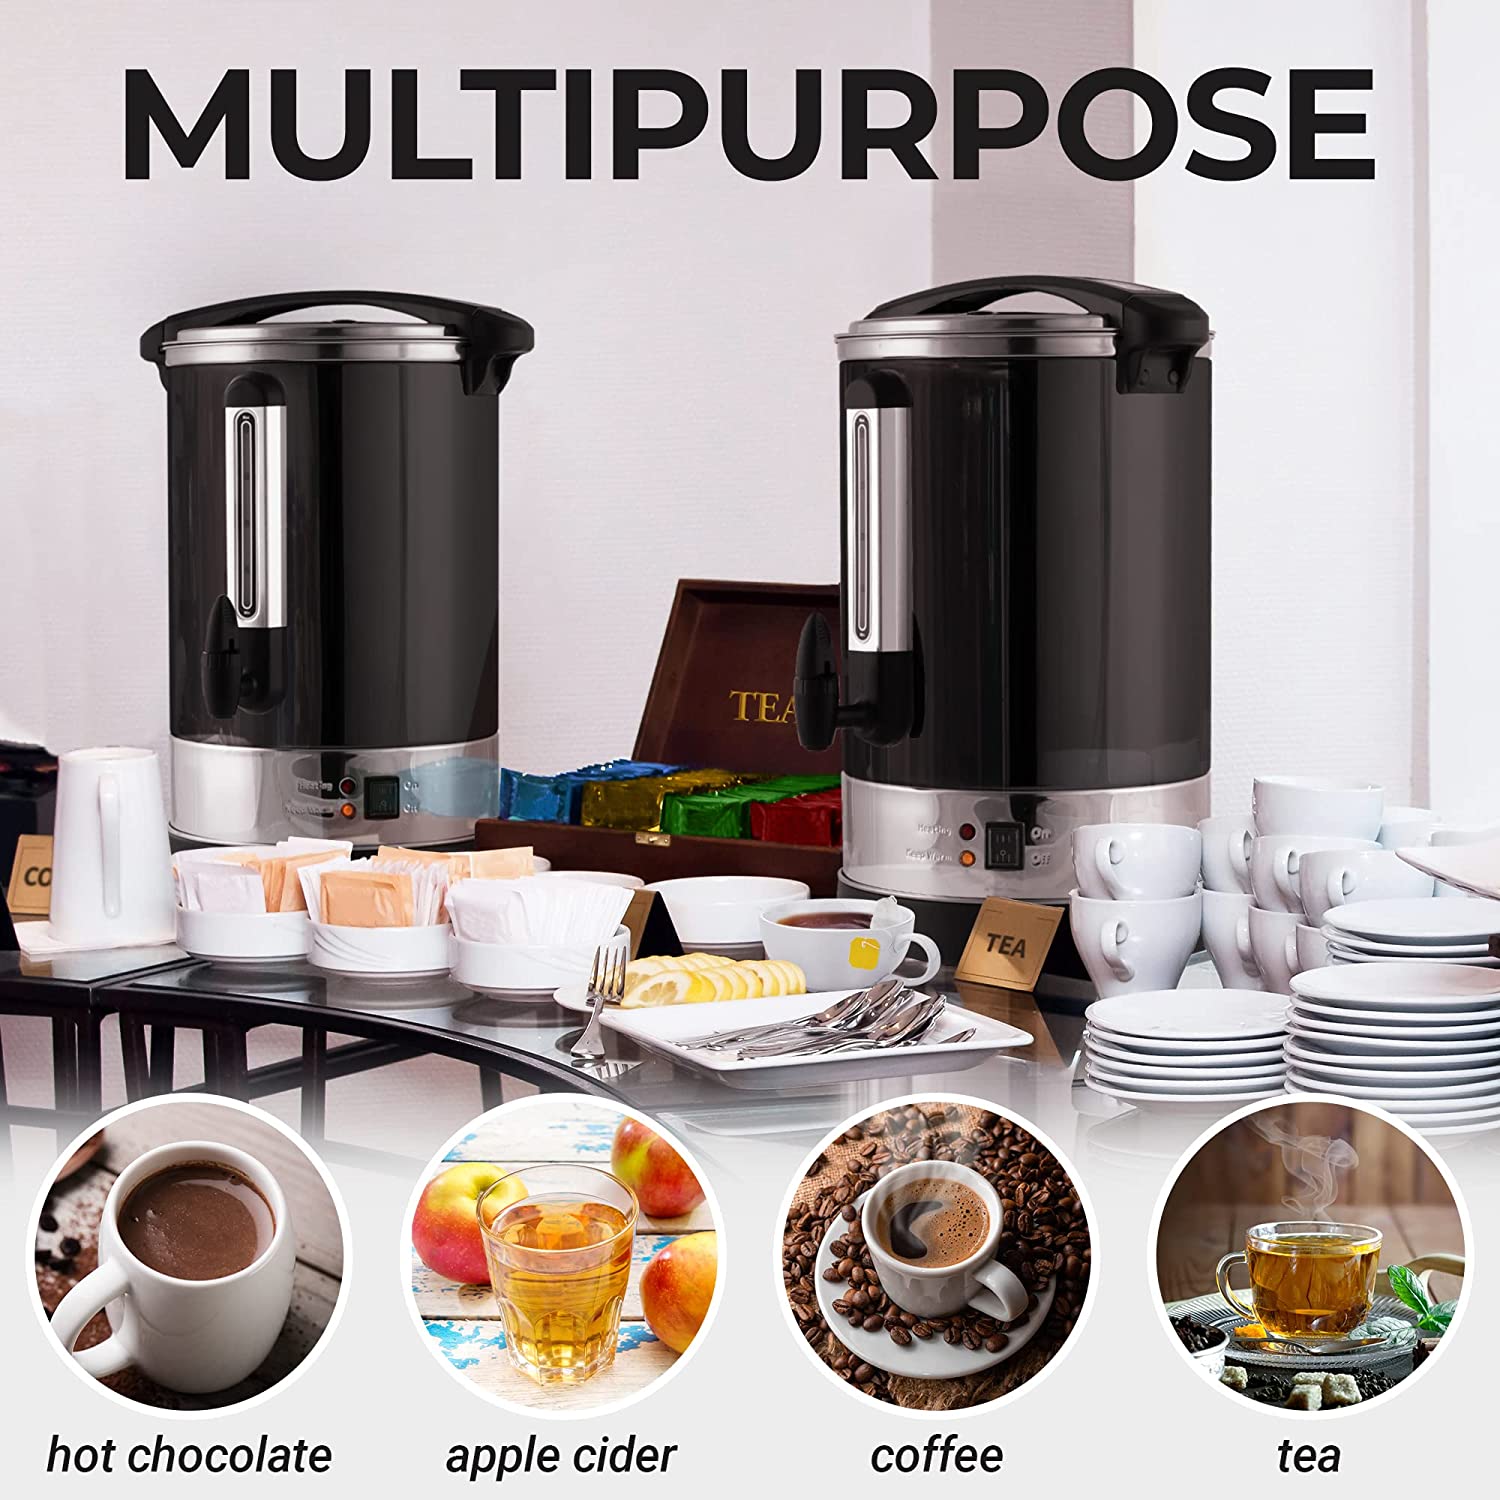 https://cdn.shopify.com/s/files/1/0091/0593/2324/products/premium-commercial-coffee-urn-blackpremium-commercial-coffee-urn-blackzulay-kitchenzulay-kitchenz-cff-rn-100-cp-ss-bs-963669.jpg?v=1700583102&width=1500